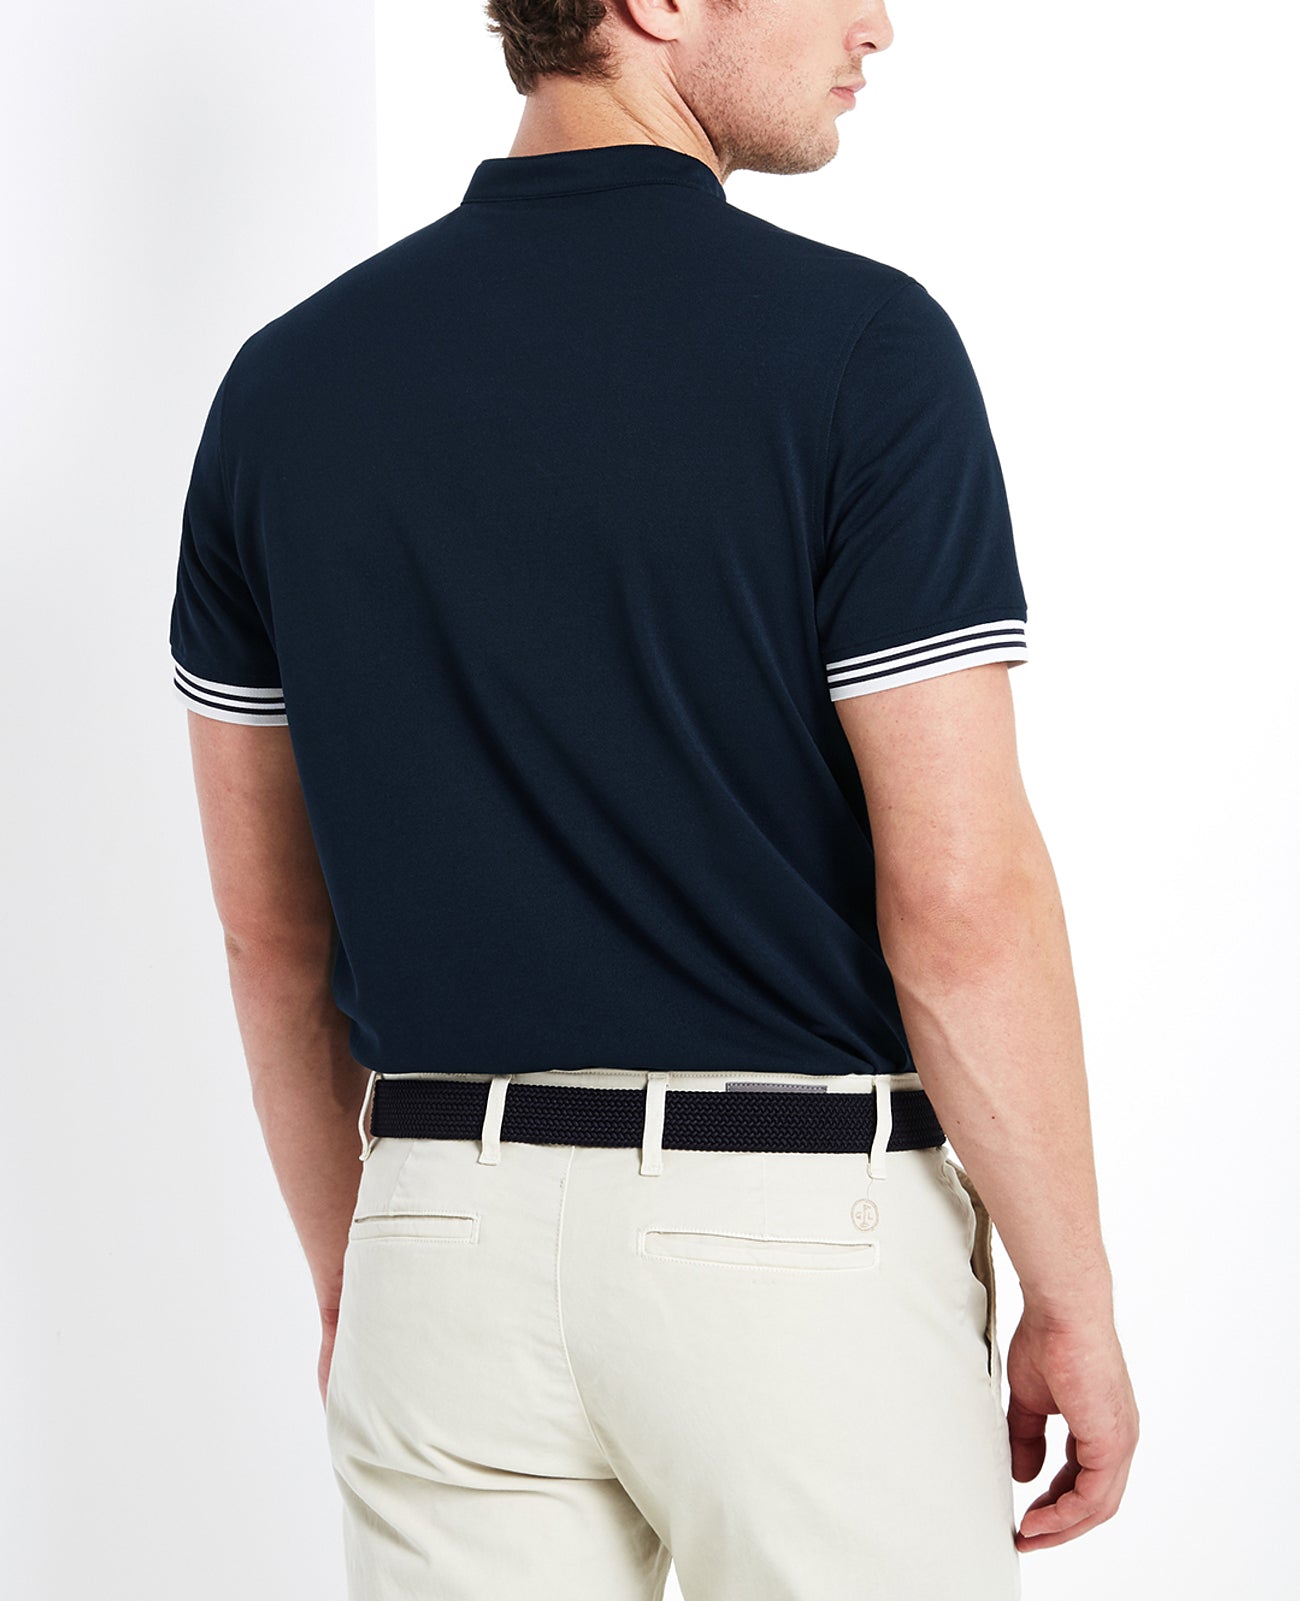 Haskett Polo Naval Blue Green Label Collection Men Tops Photo 3